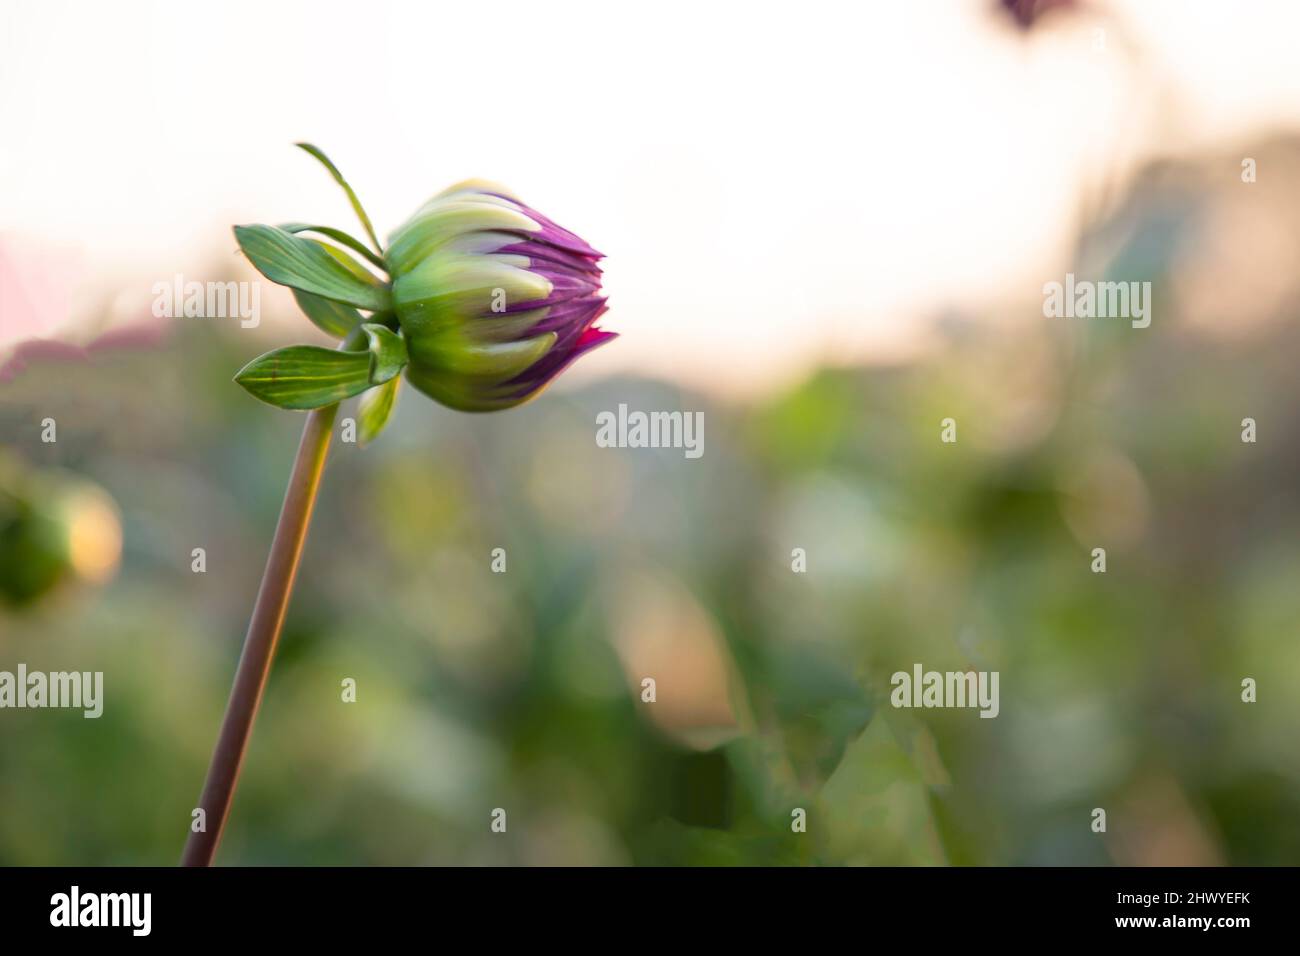 Beautiful Pink Flower Bud with blurry background. Spring dahlia Flower bud natural view Stock Photo